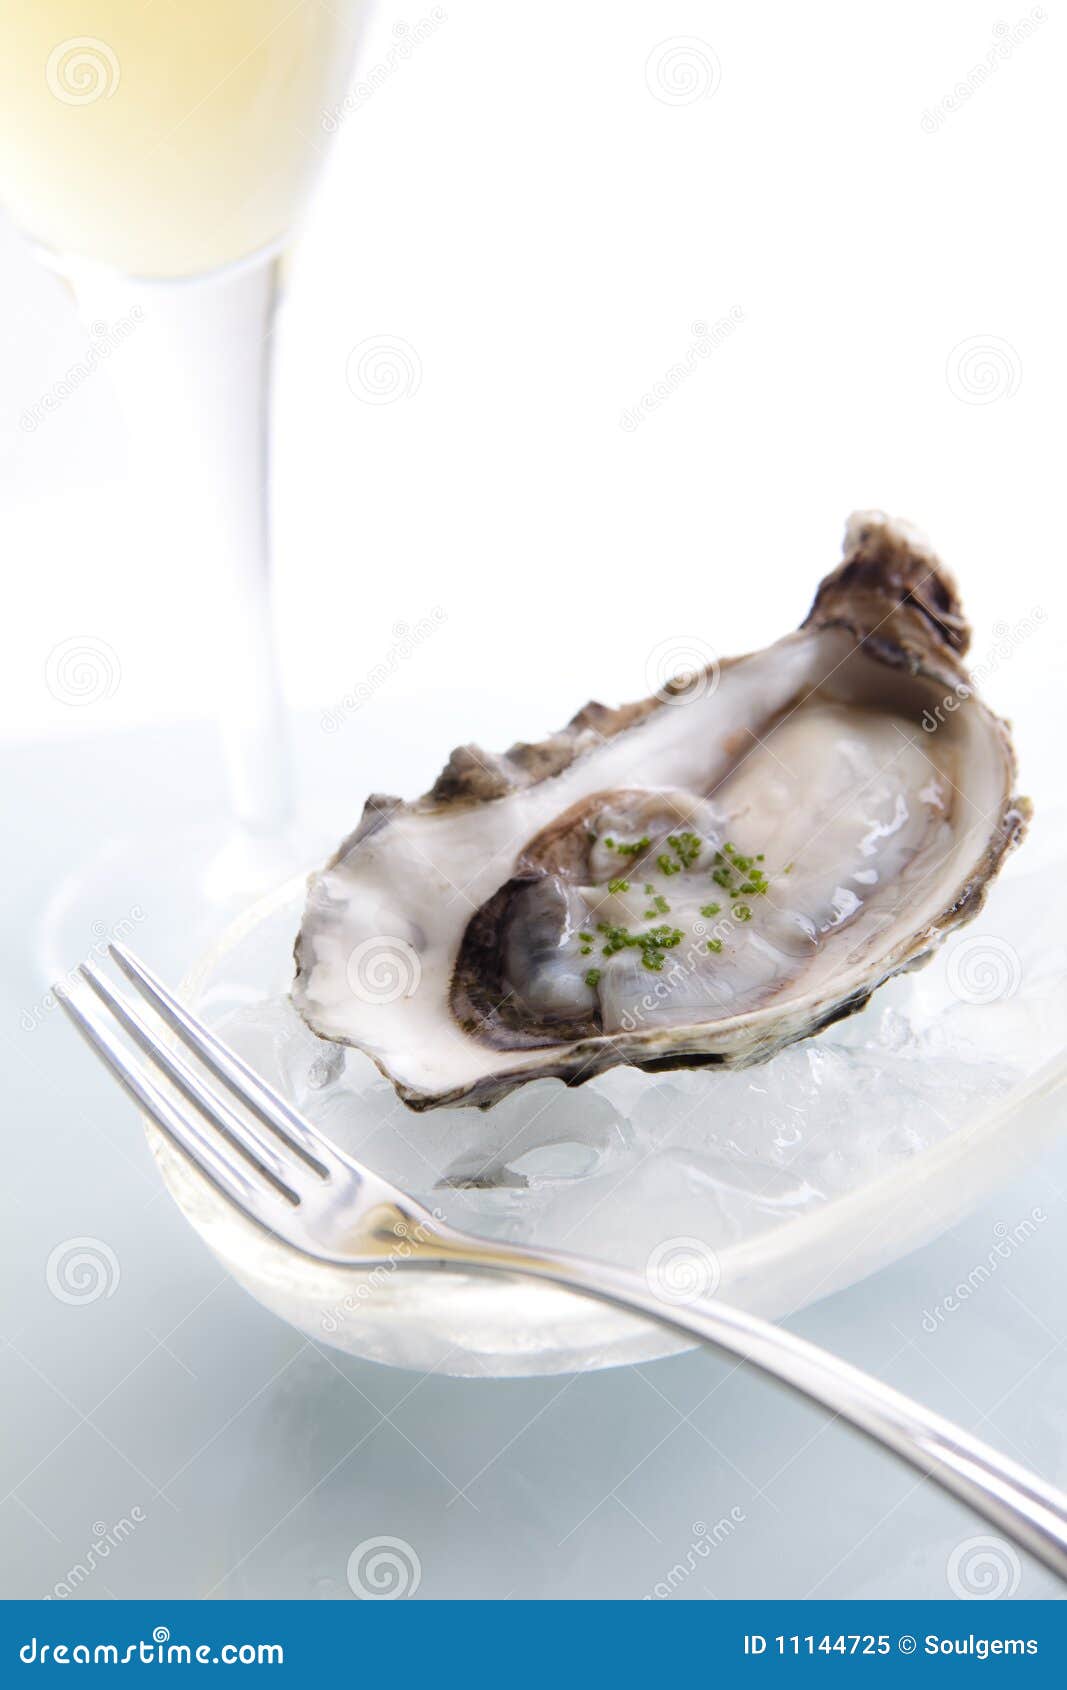 raw oyster on ice